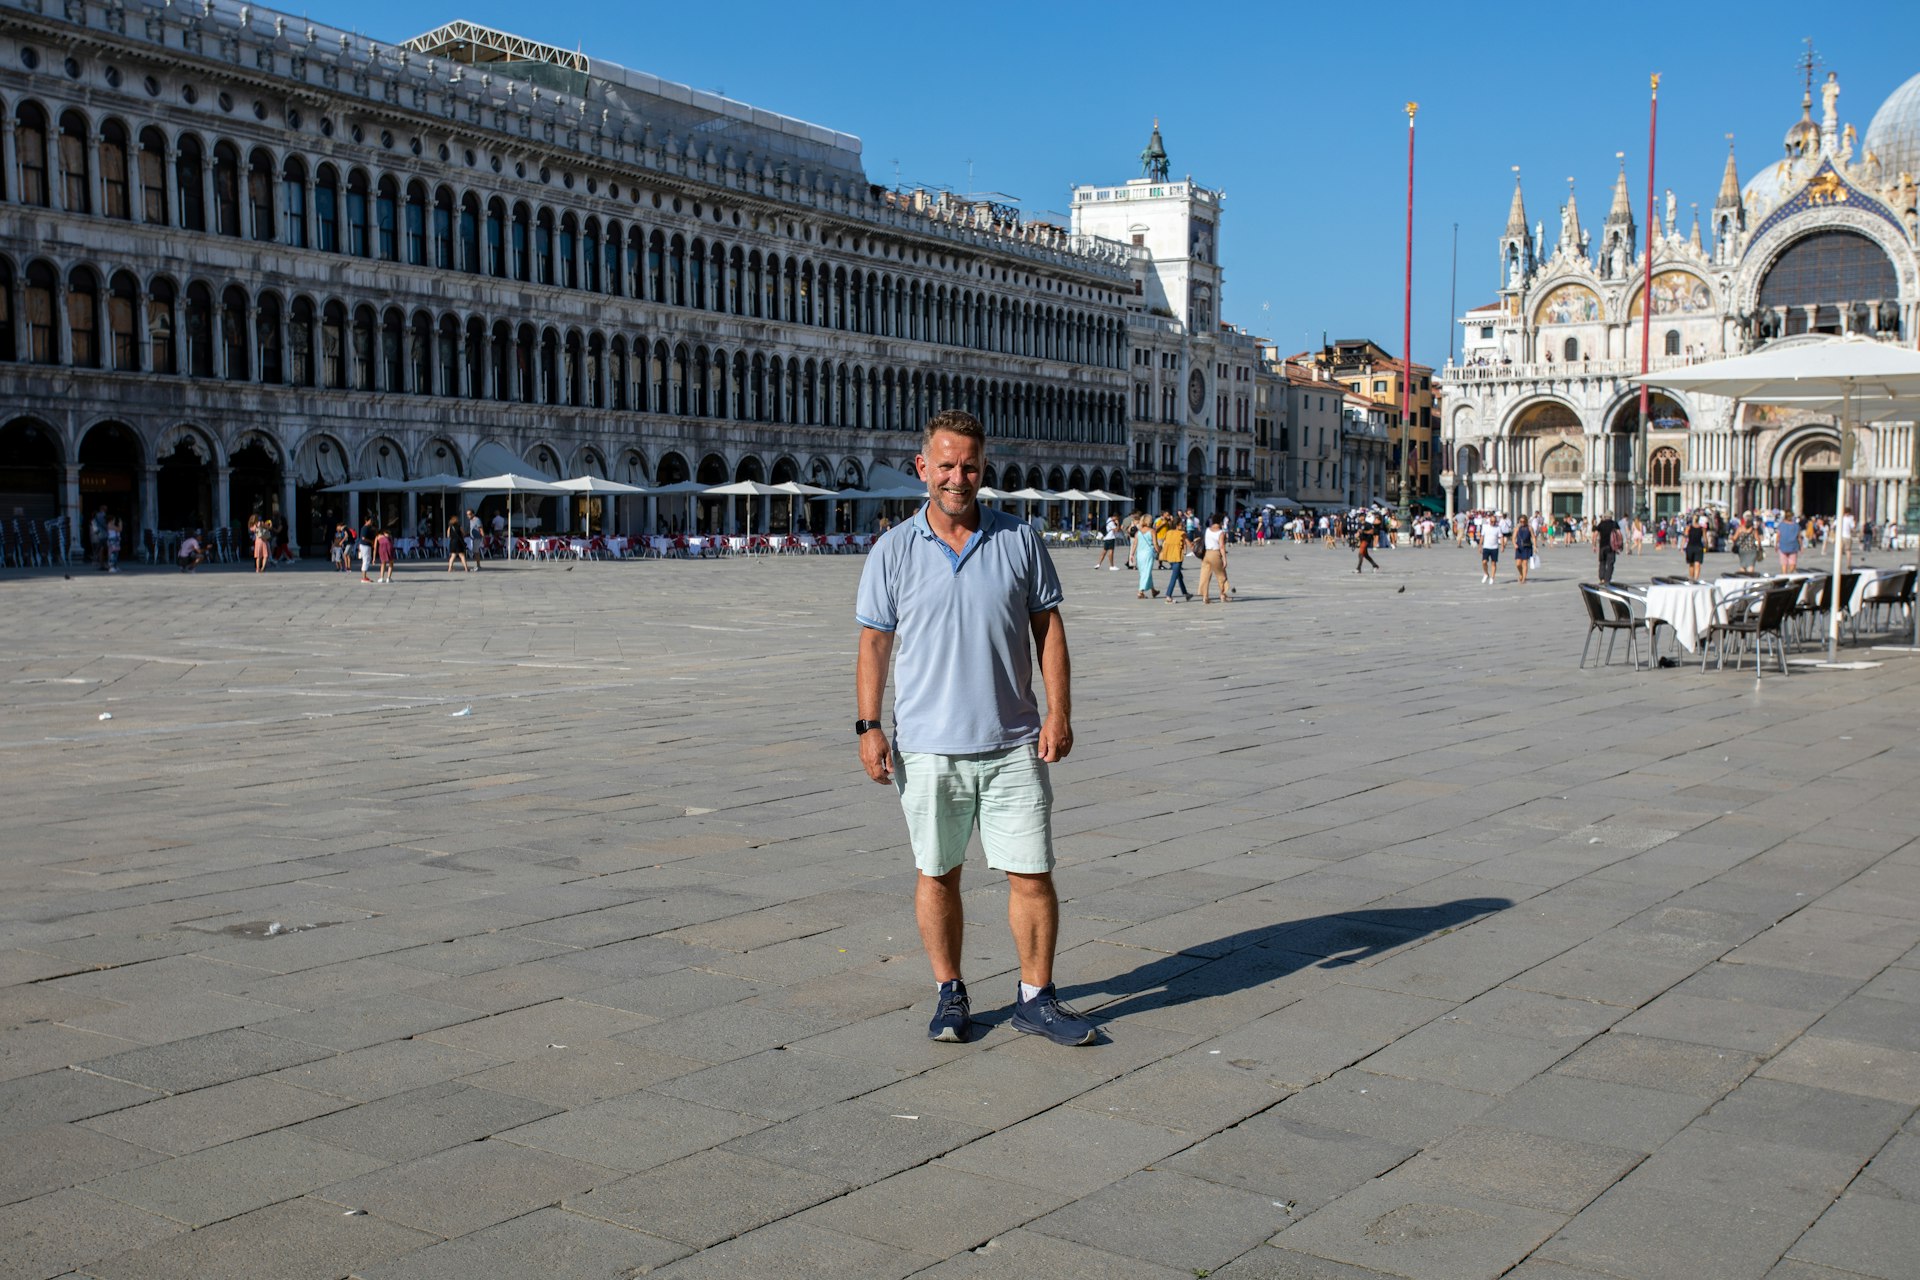 A man stands solo in the middle of an empty city square in the summertime